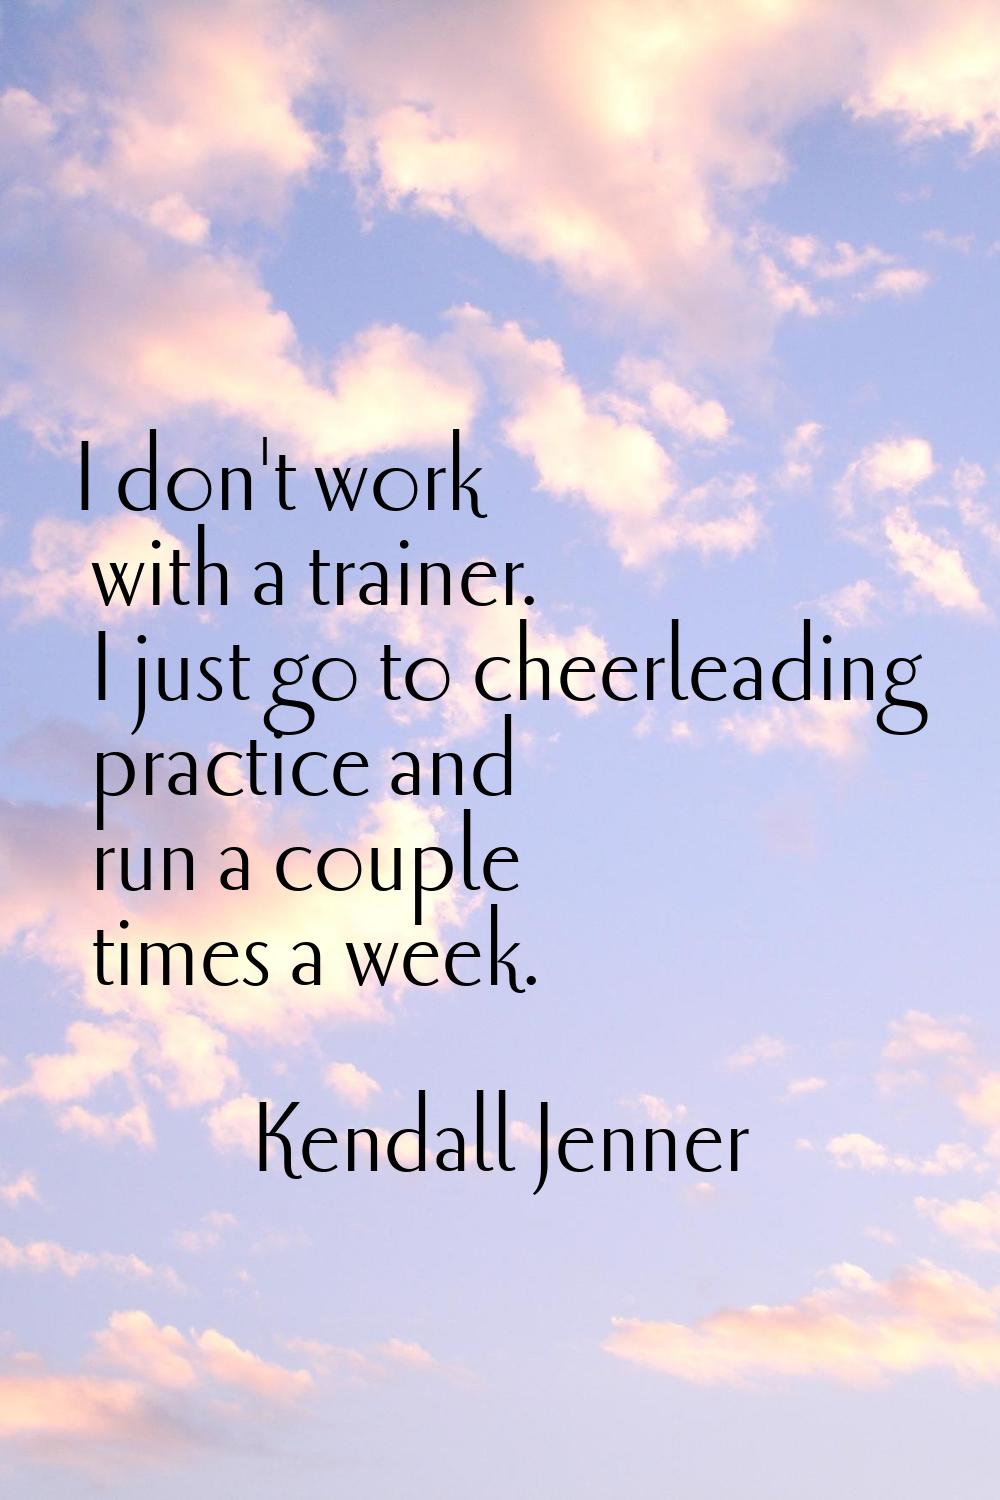 I don't work with a trainer. I just go to cheerleading practice and run a couple times a week.